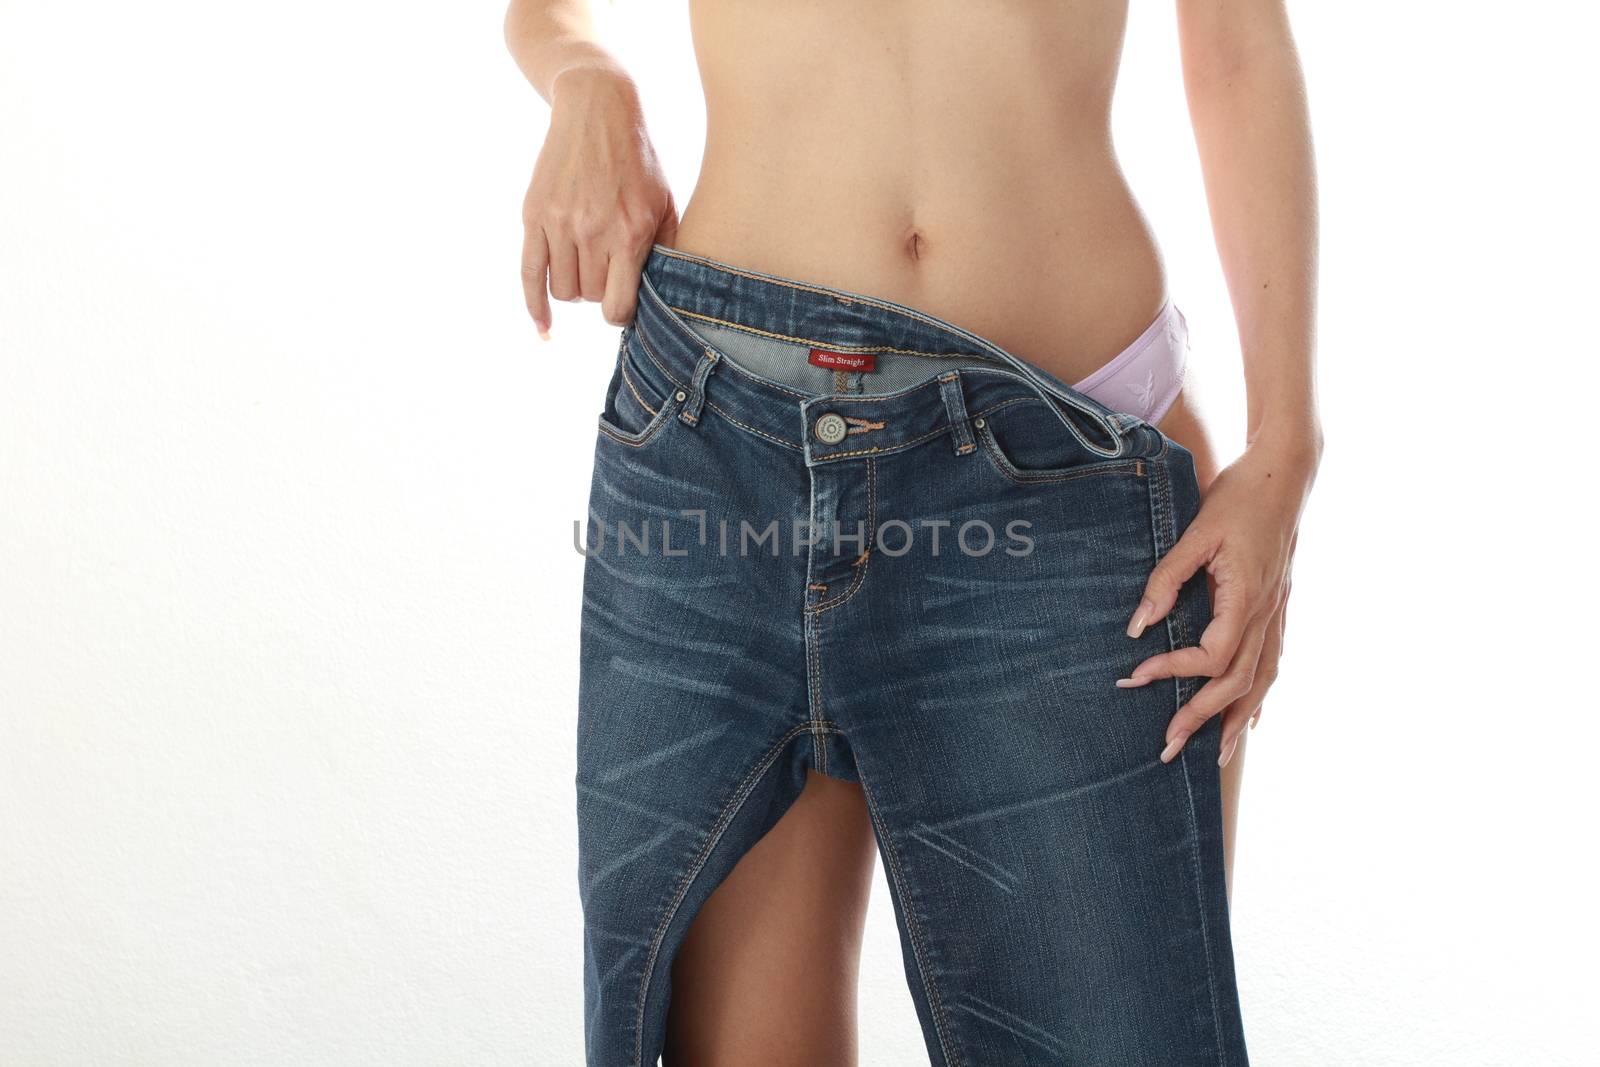 Sexy female take off jeans, isolated on white background.